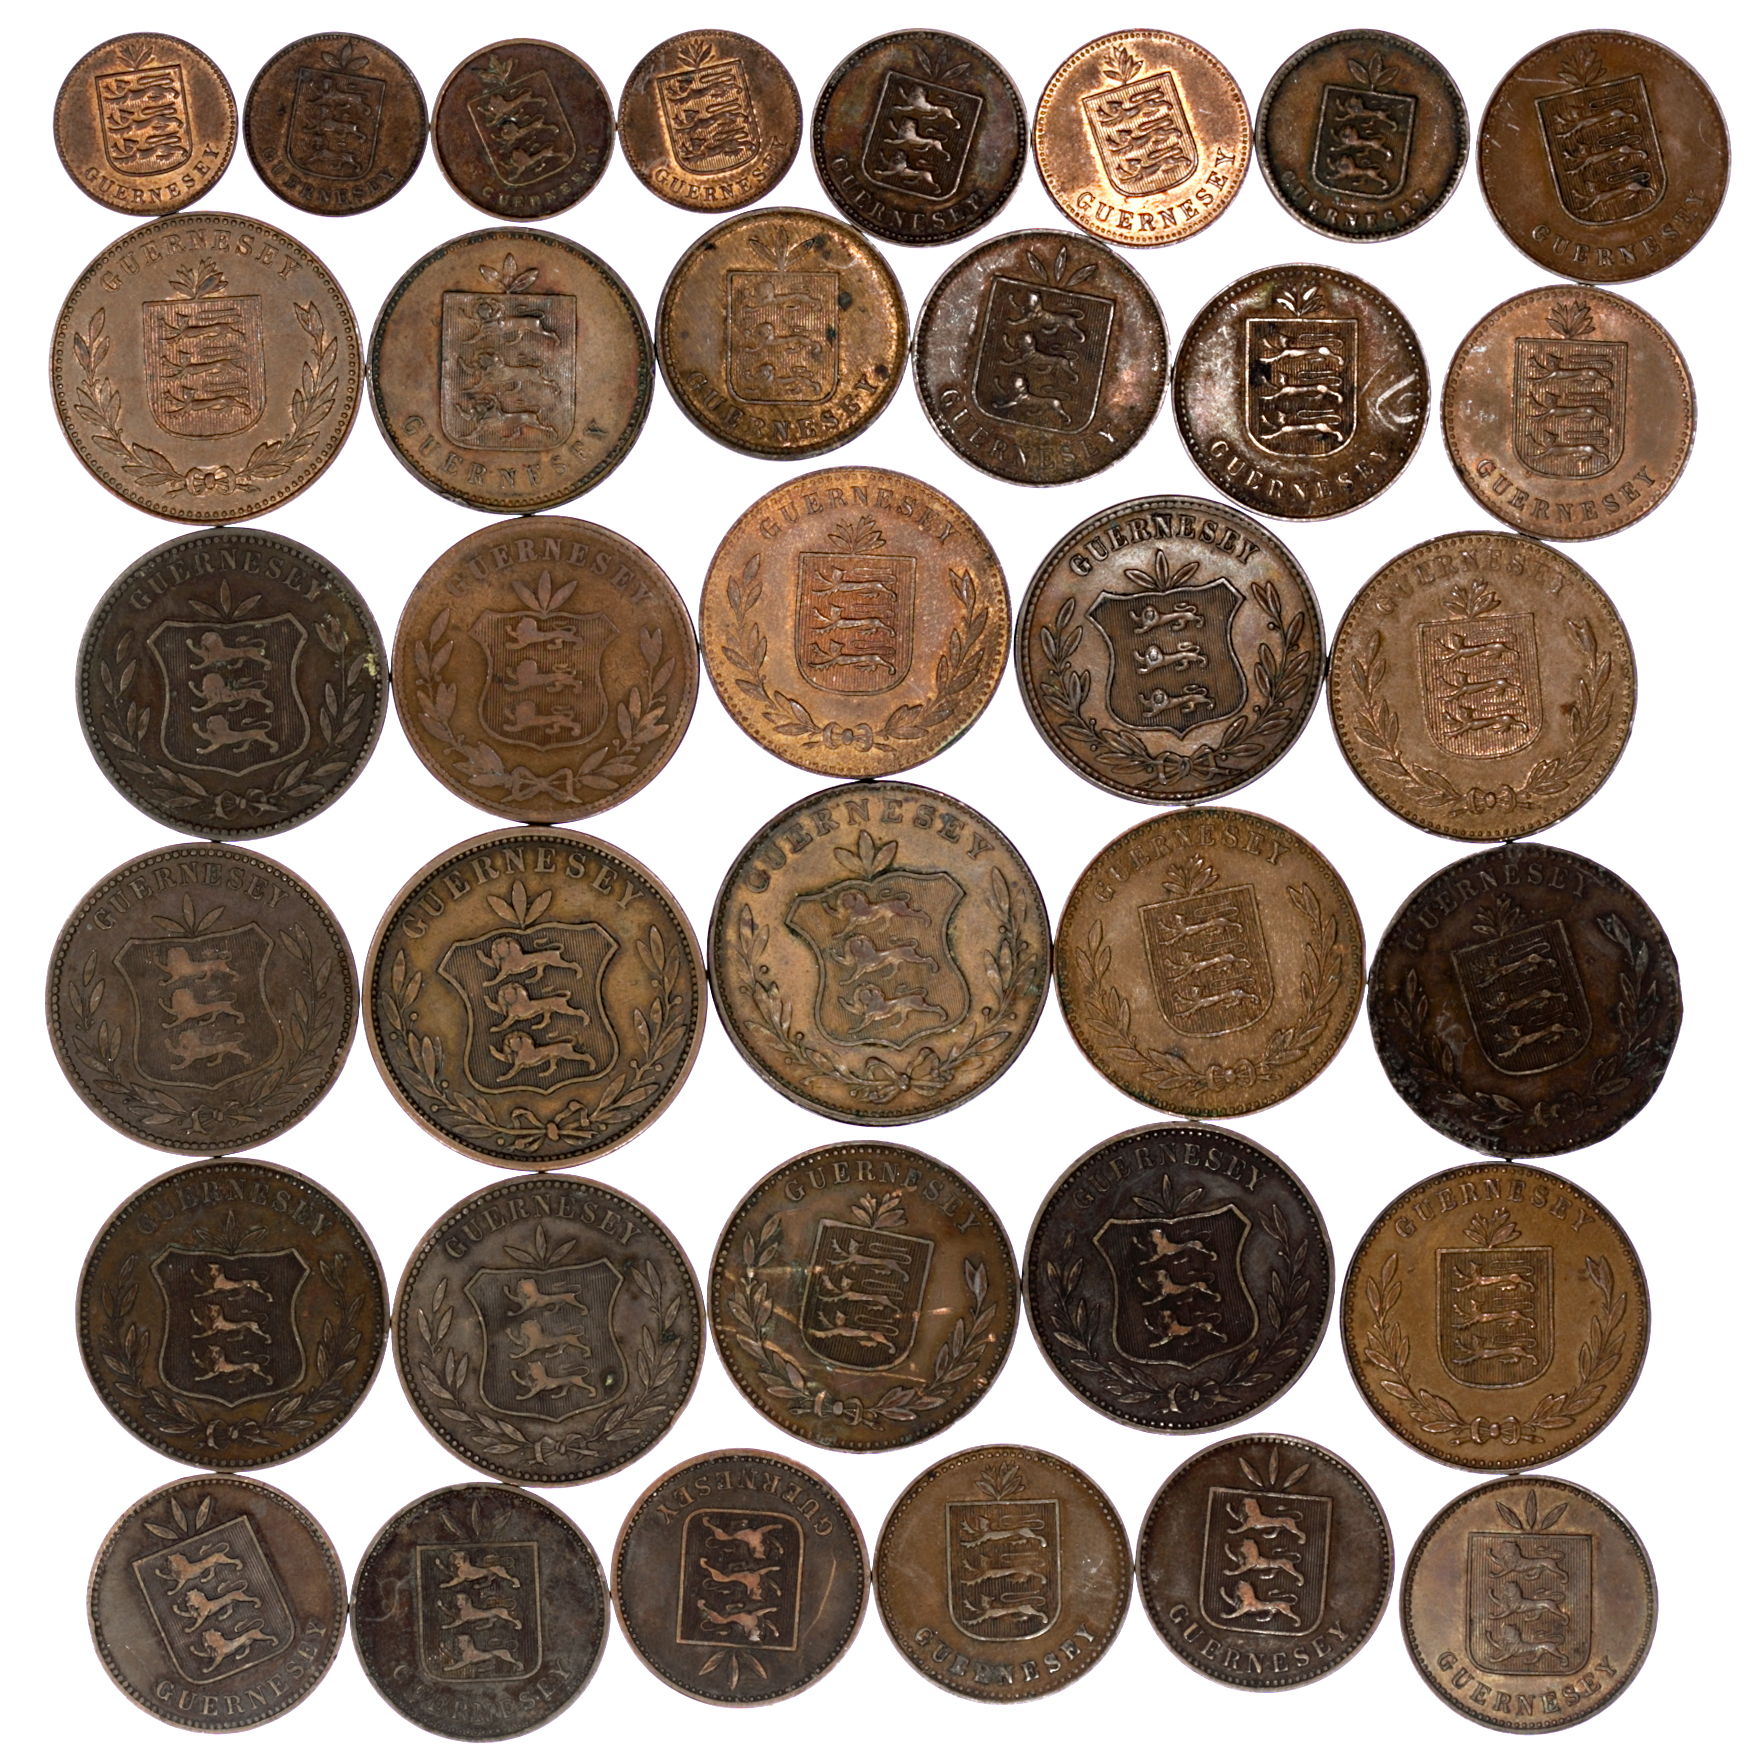 Channel Islands - Collection of coins from Guernsey. - Image 2 of 3